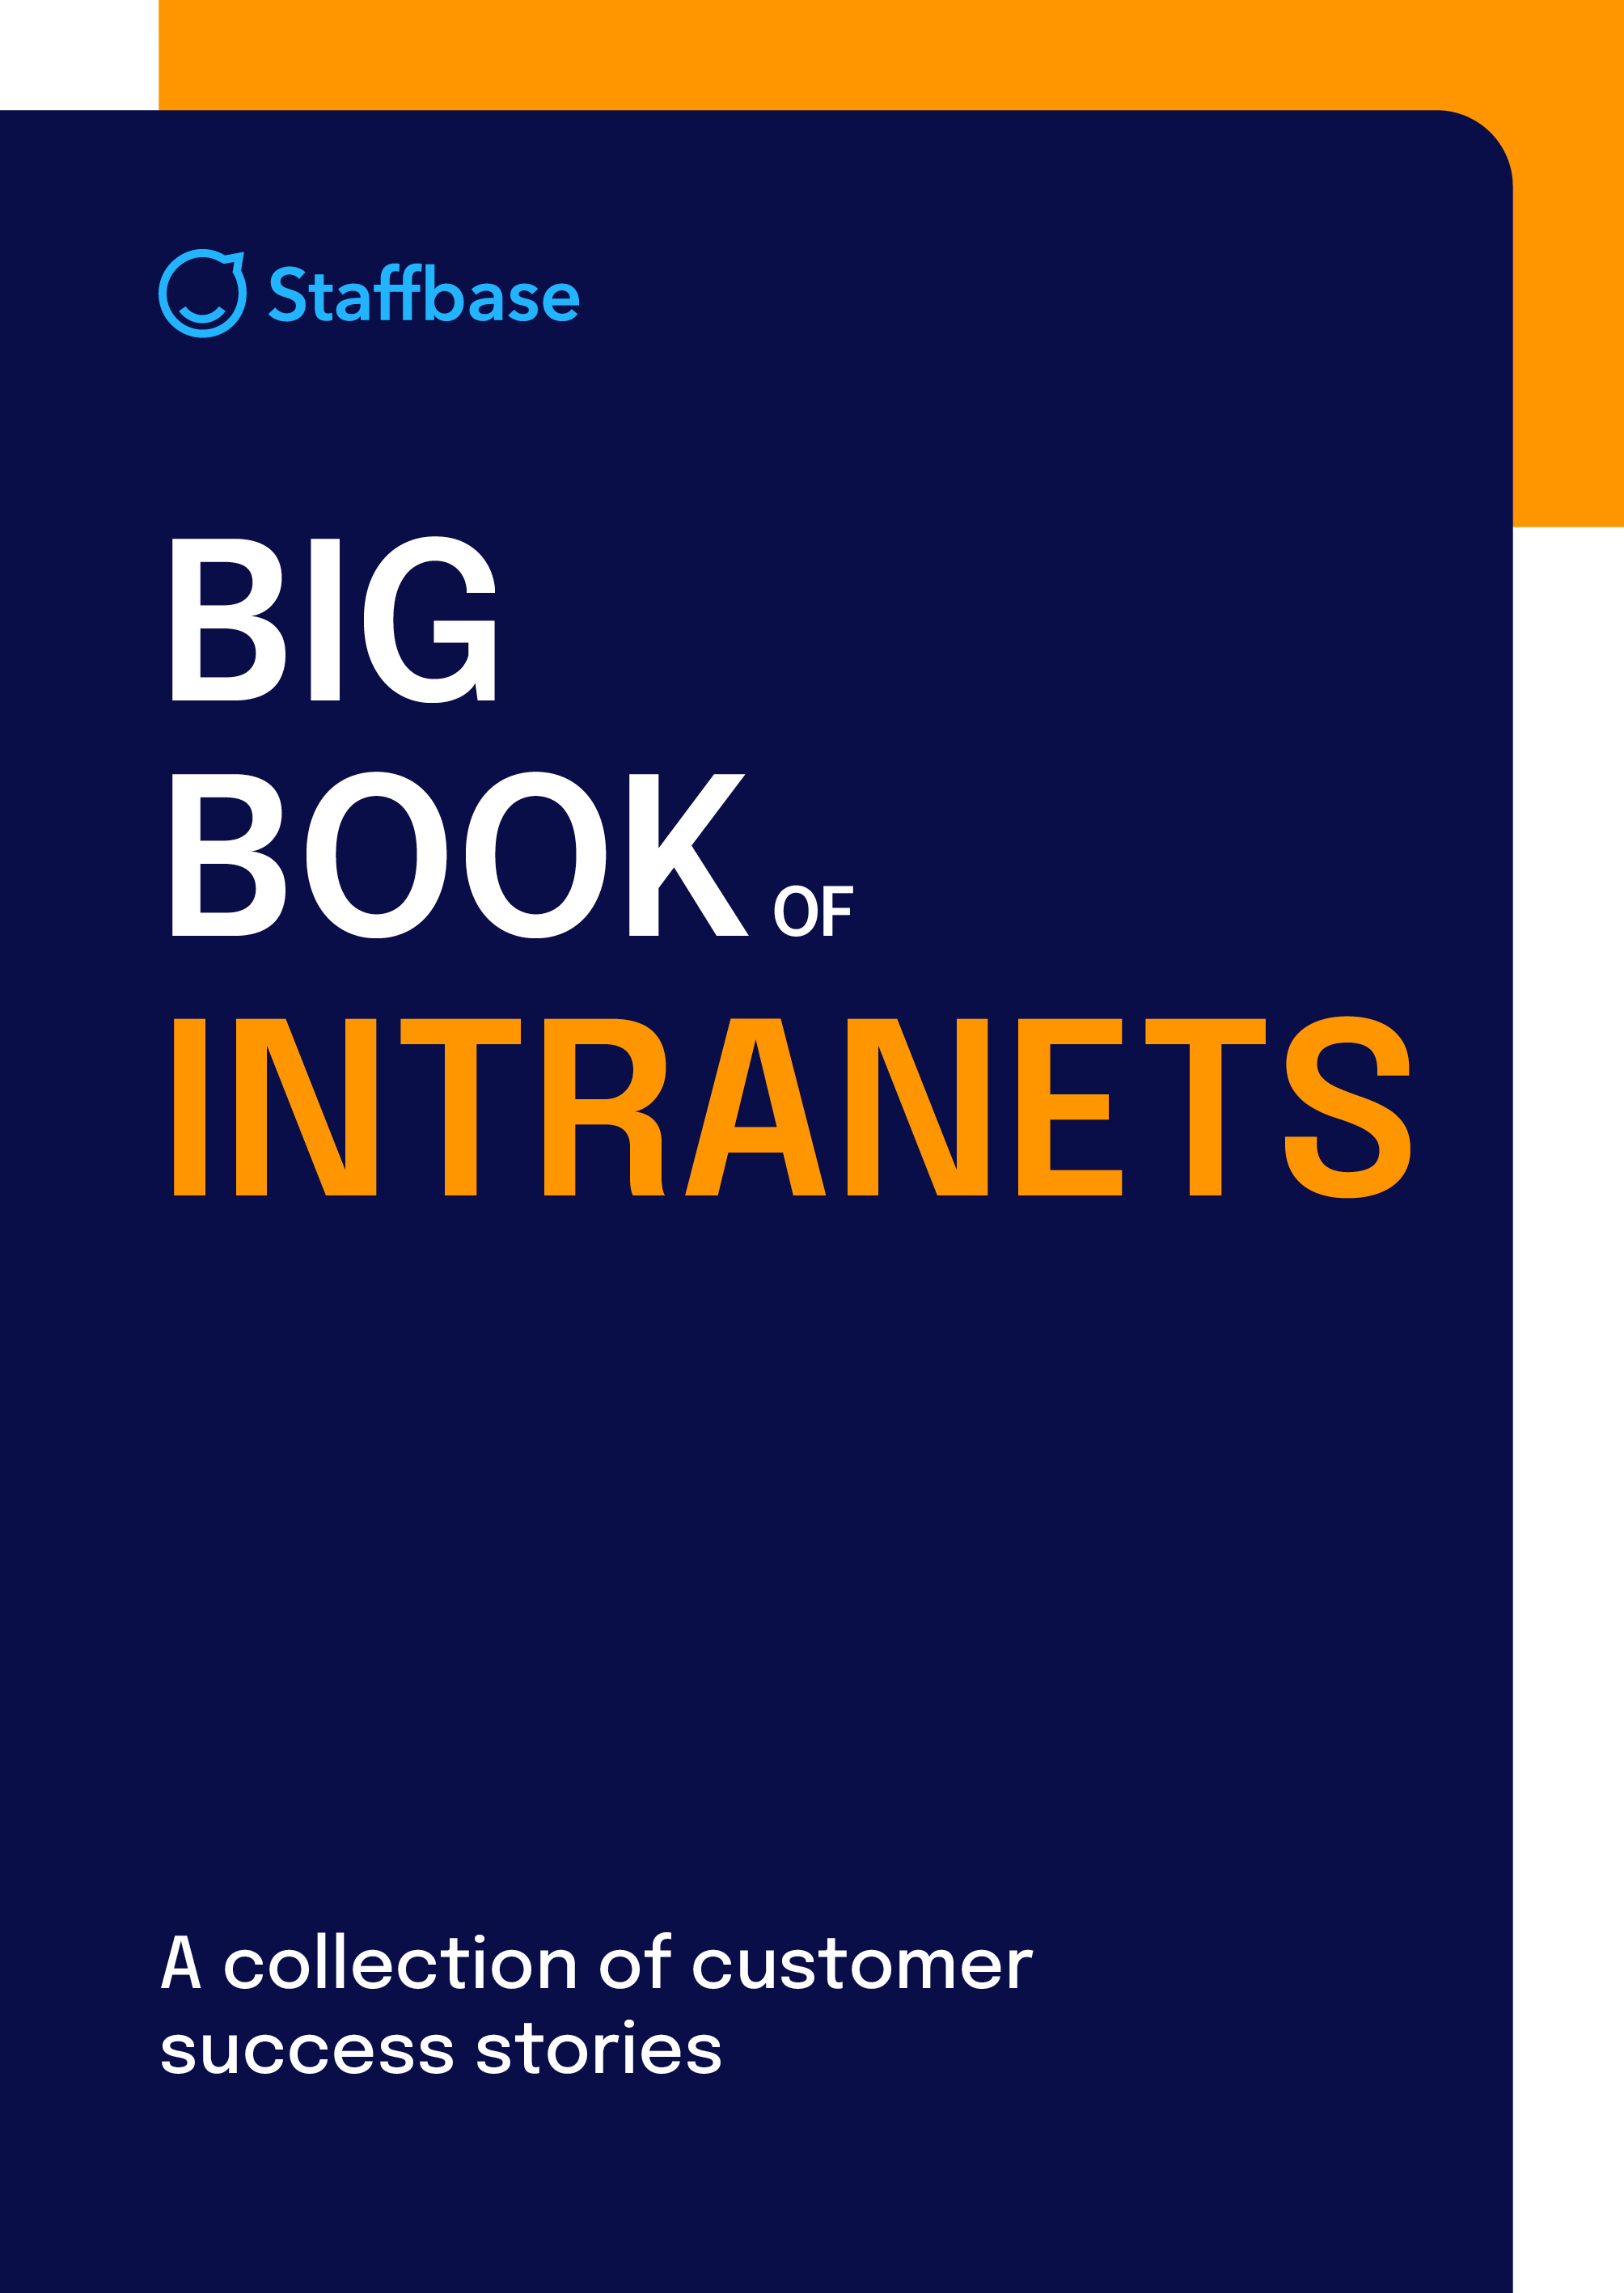 Big Book of Intranets ENG - WEB 240215KL cover